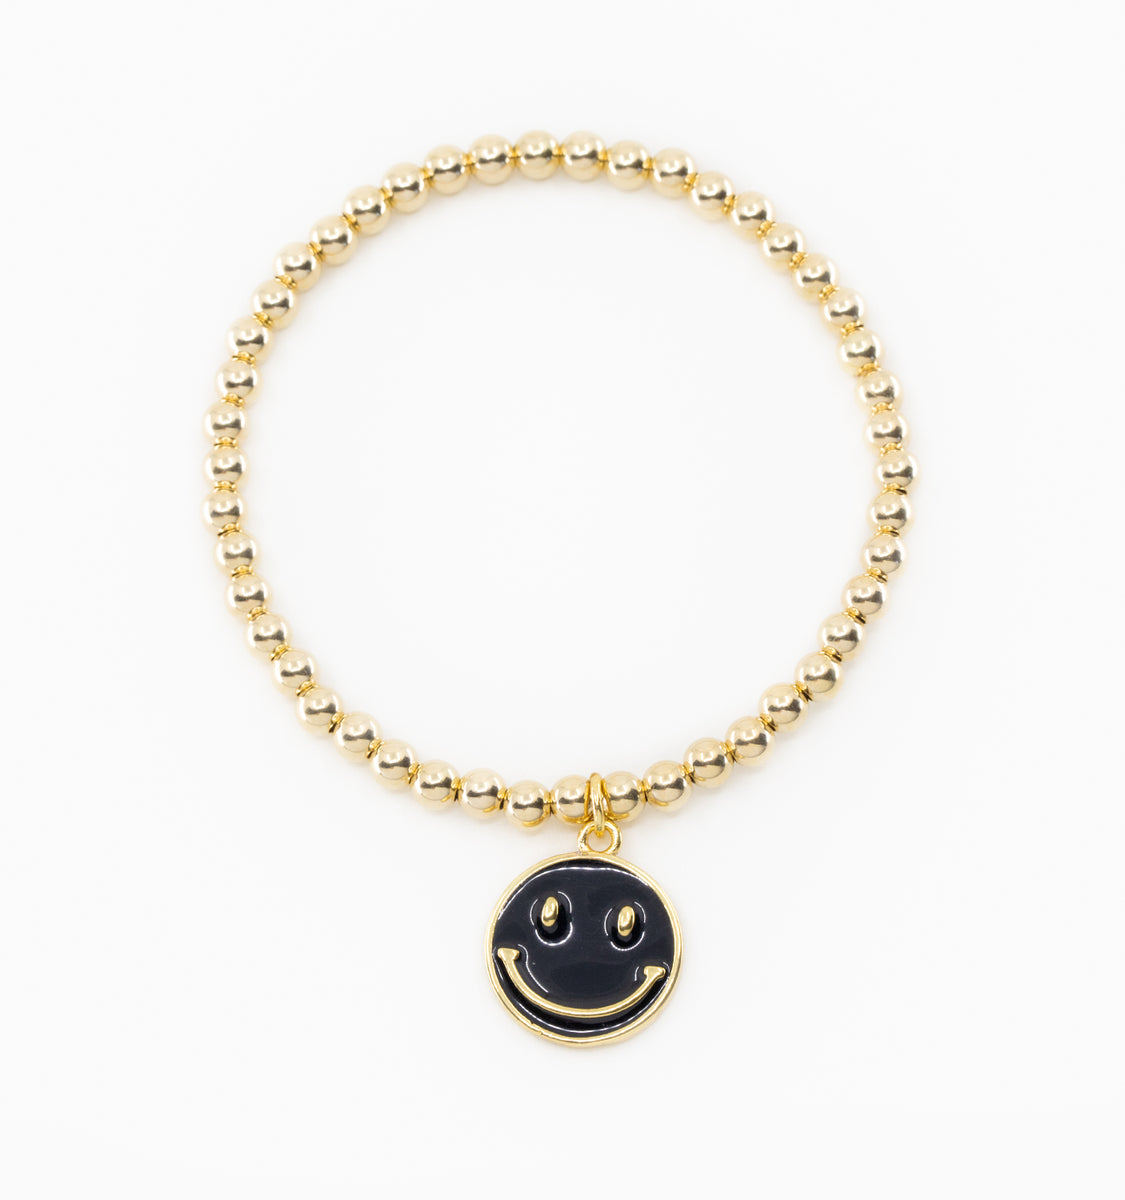 Stainless Steel Happy Face Charm Bracelet Rose Gold Plated